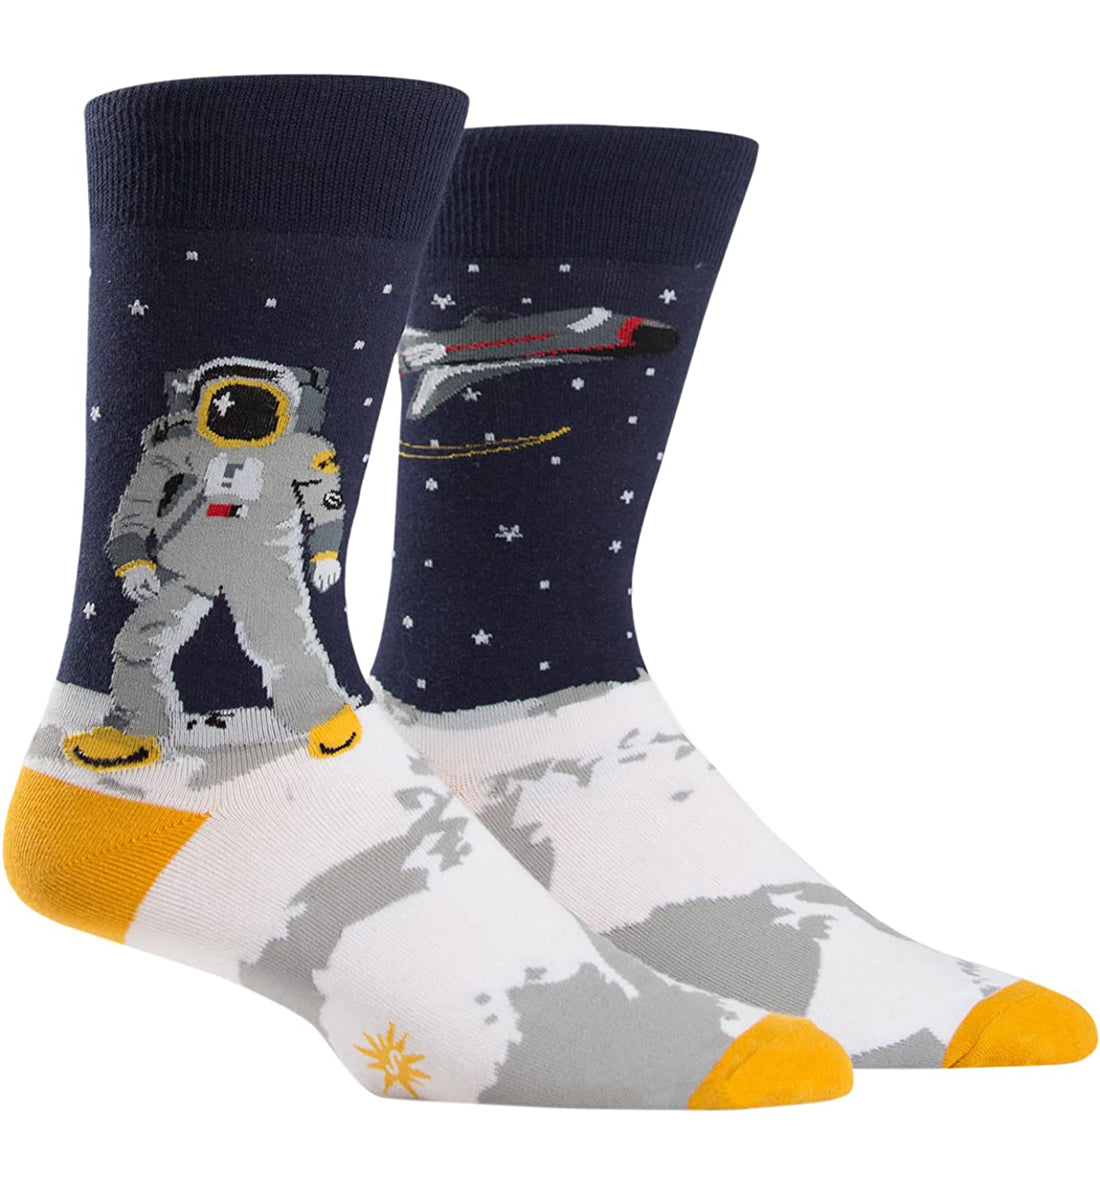 SOCK it to me Men's Crew Socks (mef0114),One Giant Leap - One Giant Leap,One Size